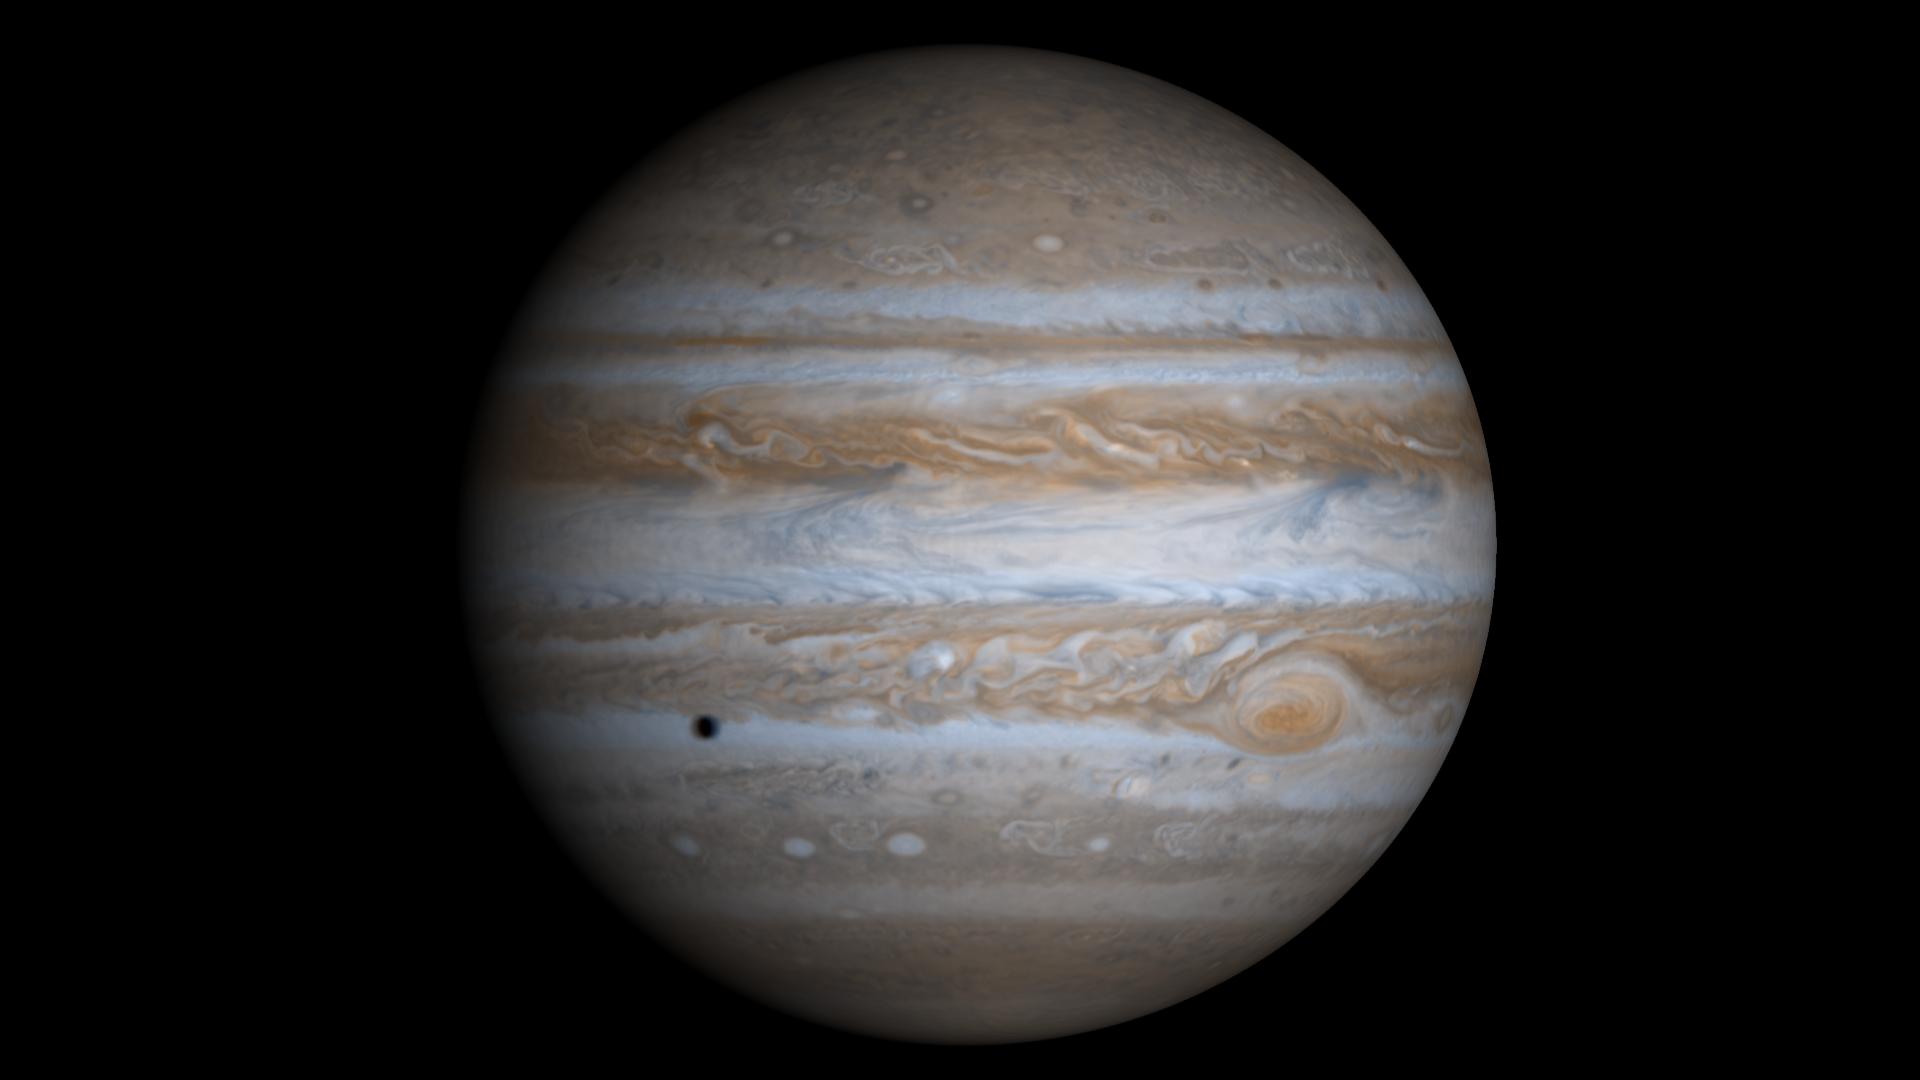 This true-color simulated view of Jupiter is composed of 4 images taken by NASA's Cassini spacecraft on December 7, 2000.